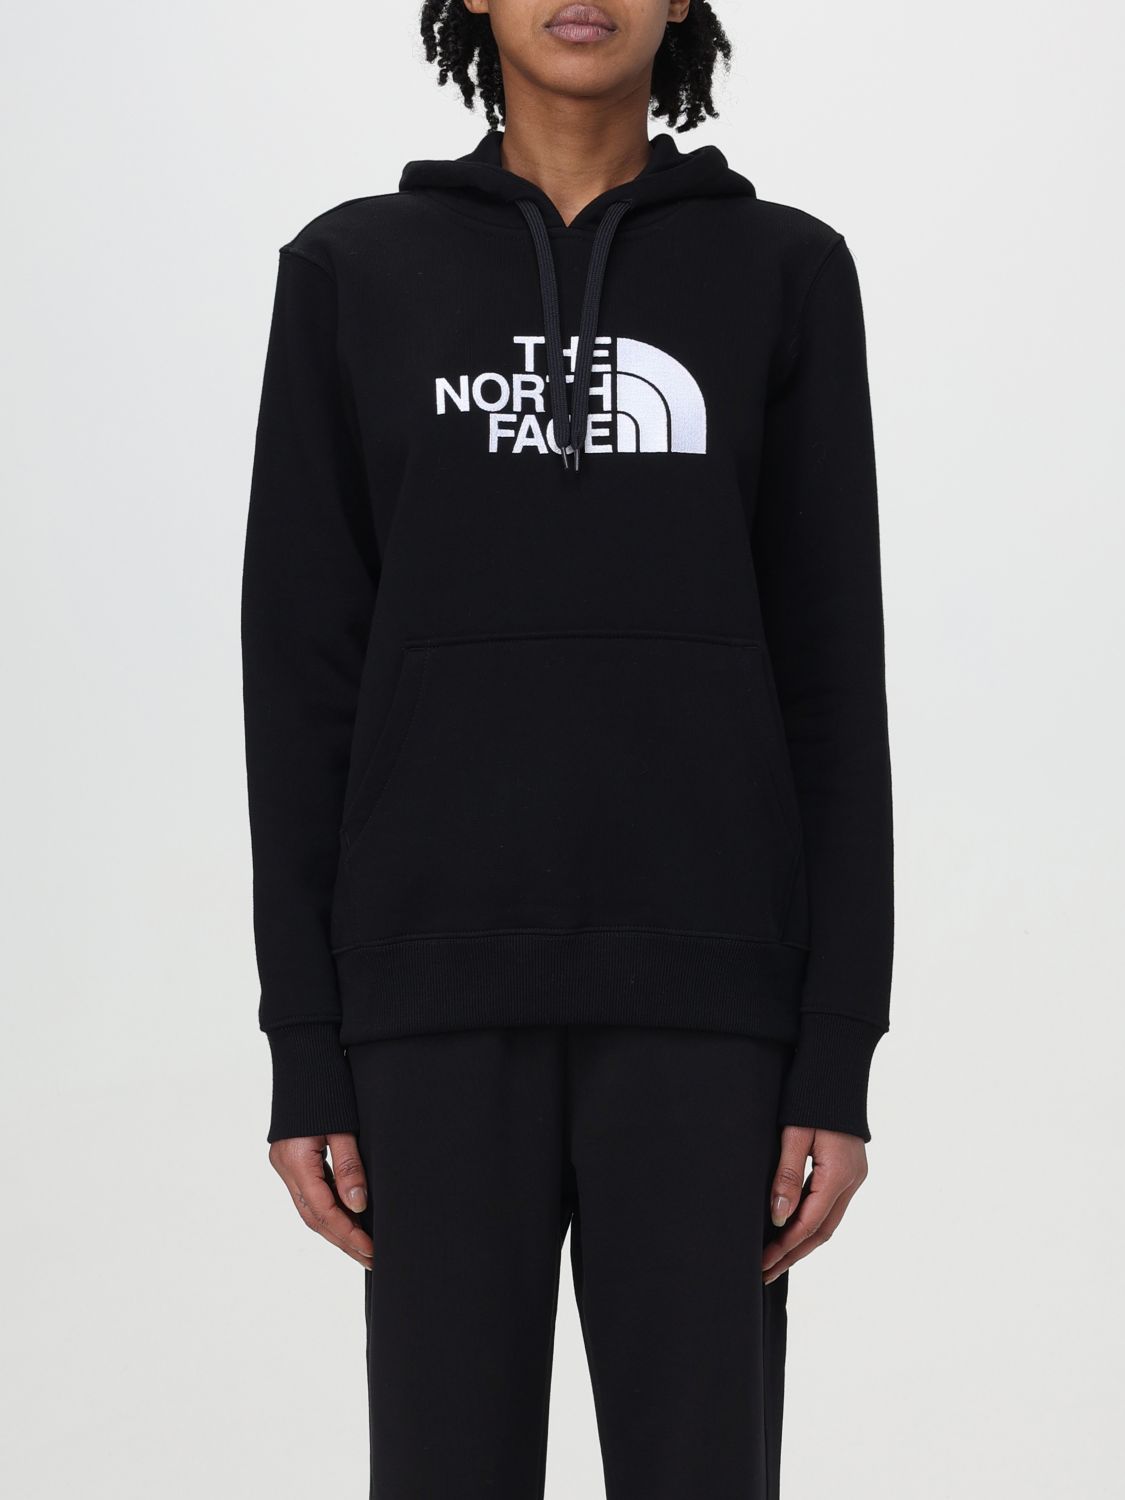 THE NORTH FACE SWEATSHIRT THE NORTH FACE WOMAN COLOR BLACK,F22275002